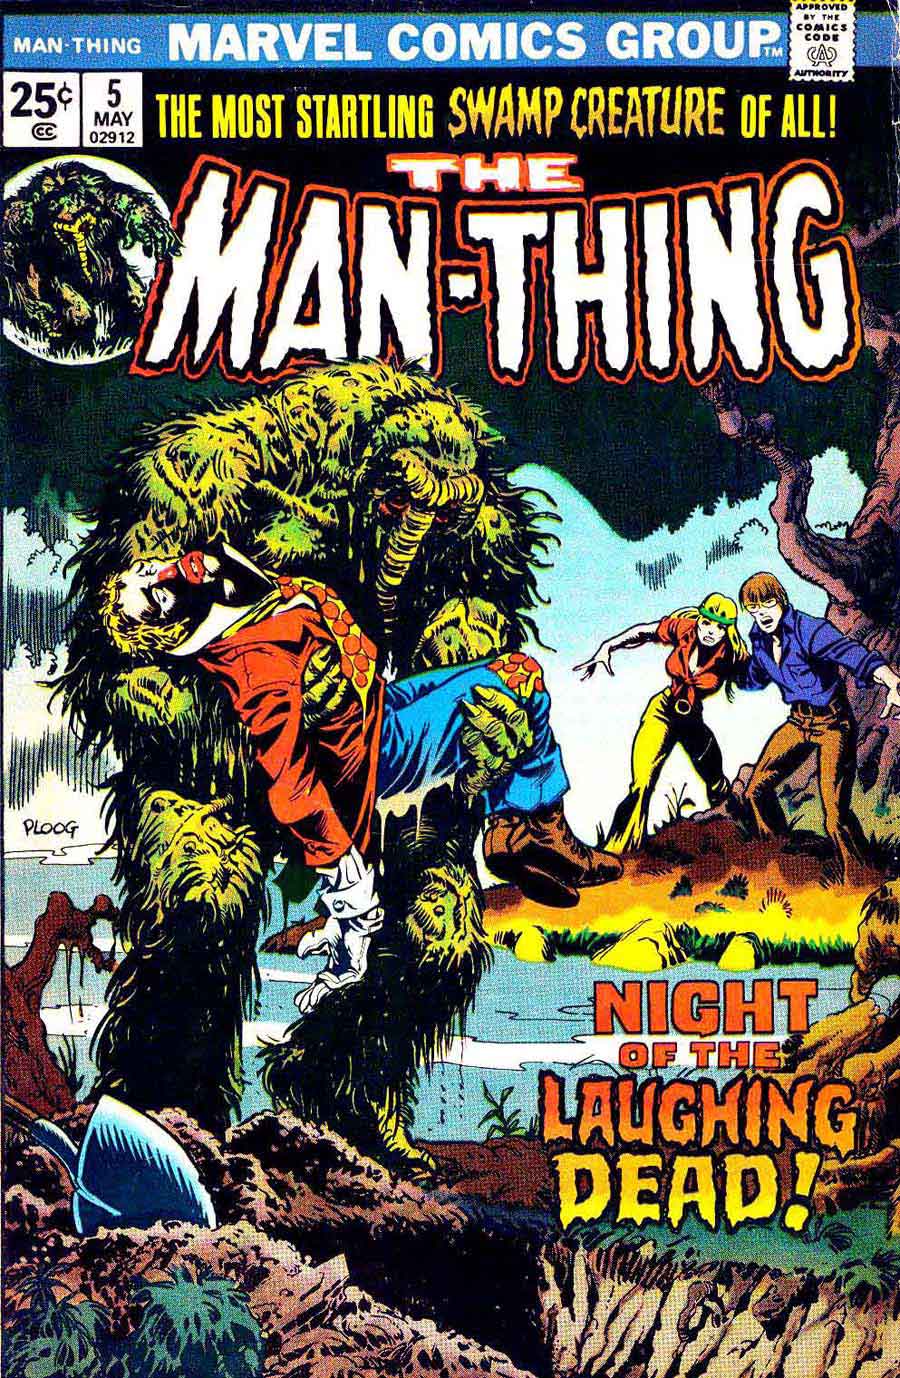 Man-Thing v1 #5 marvel 1970s bronze age comic book cover art by Mike Ploog